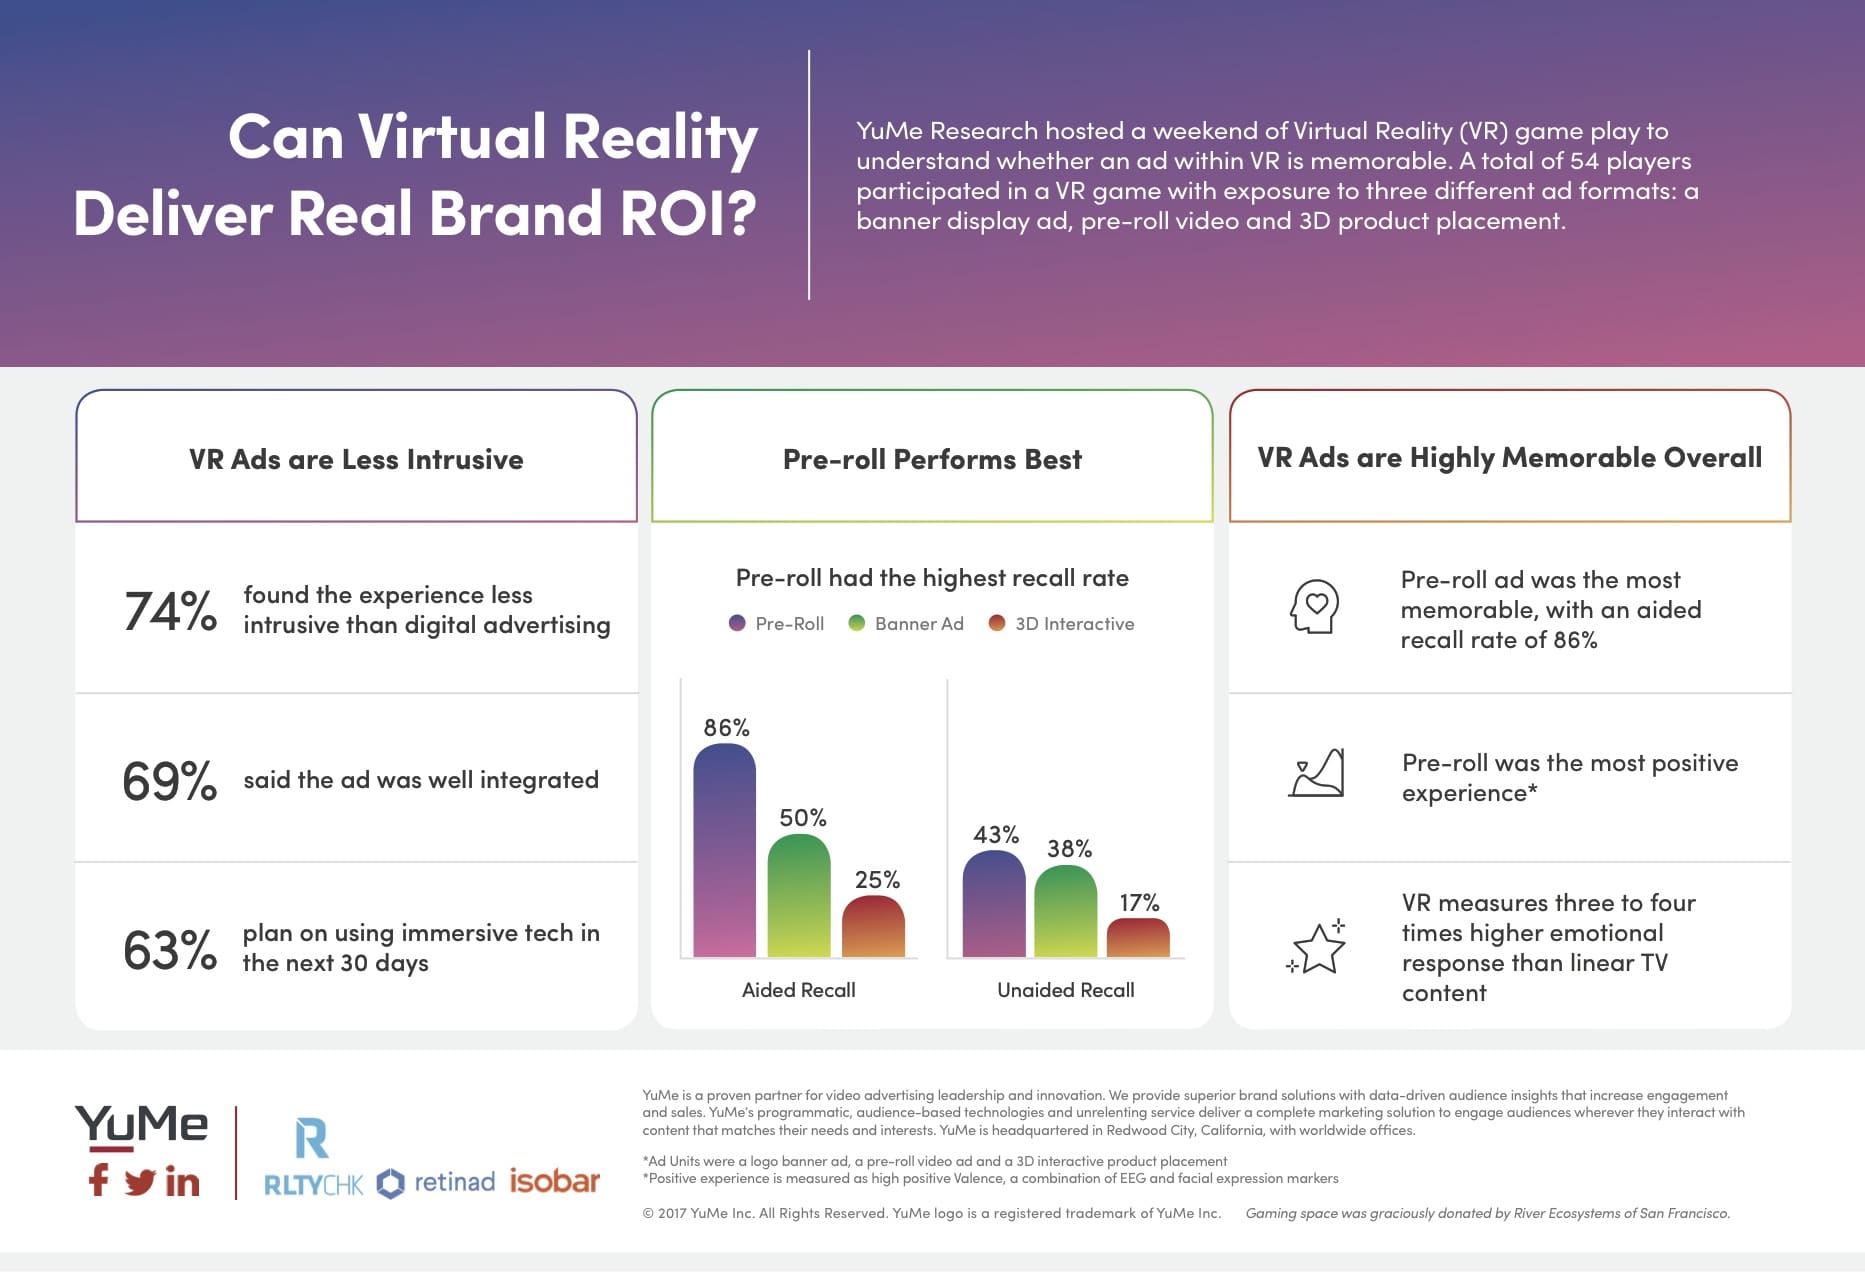 Virtual reality is adding a new dimension to brand recall